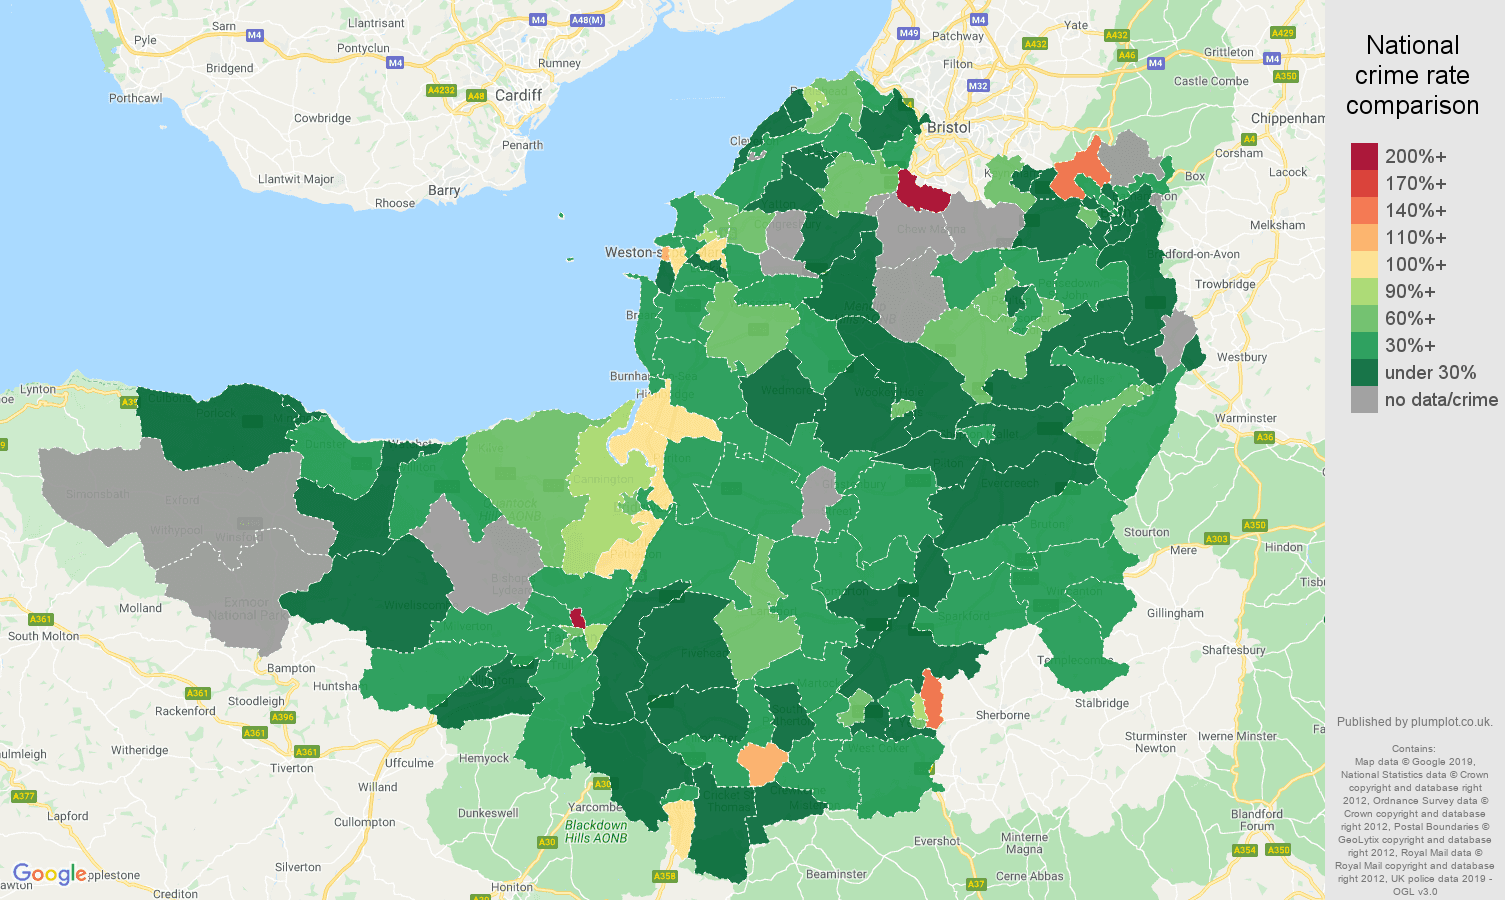 Somerset other crime rate comparison map